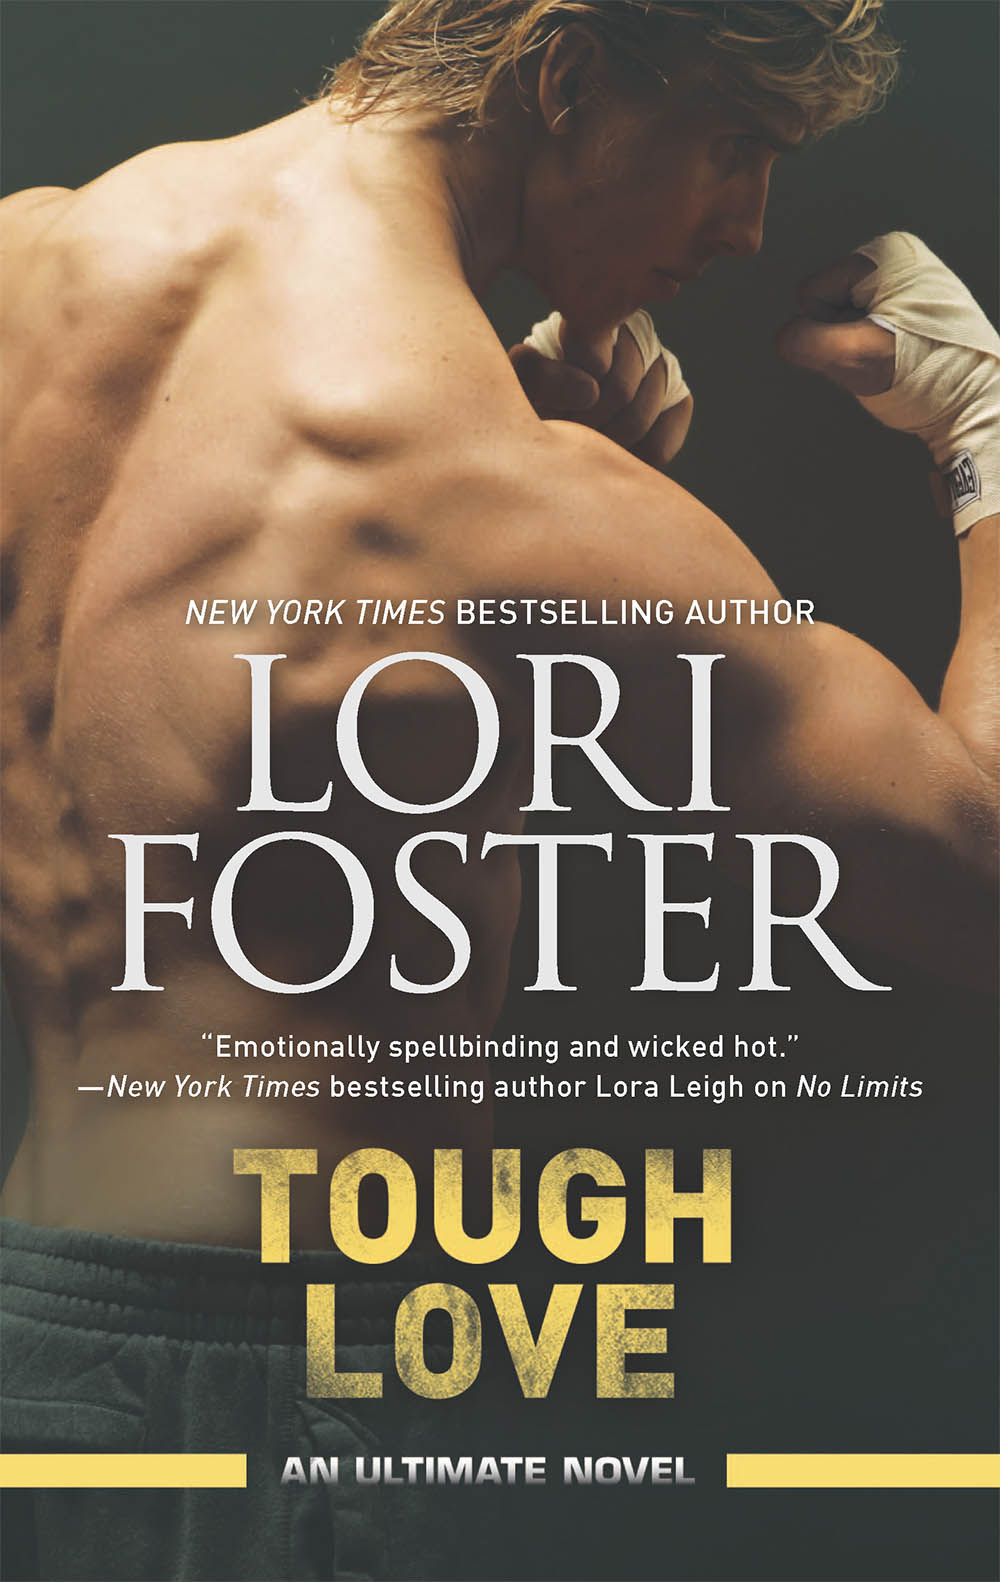 Book 2_Tough Love by Lori Foster_cover_low